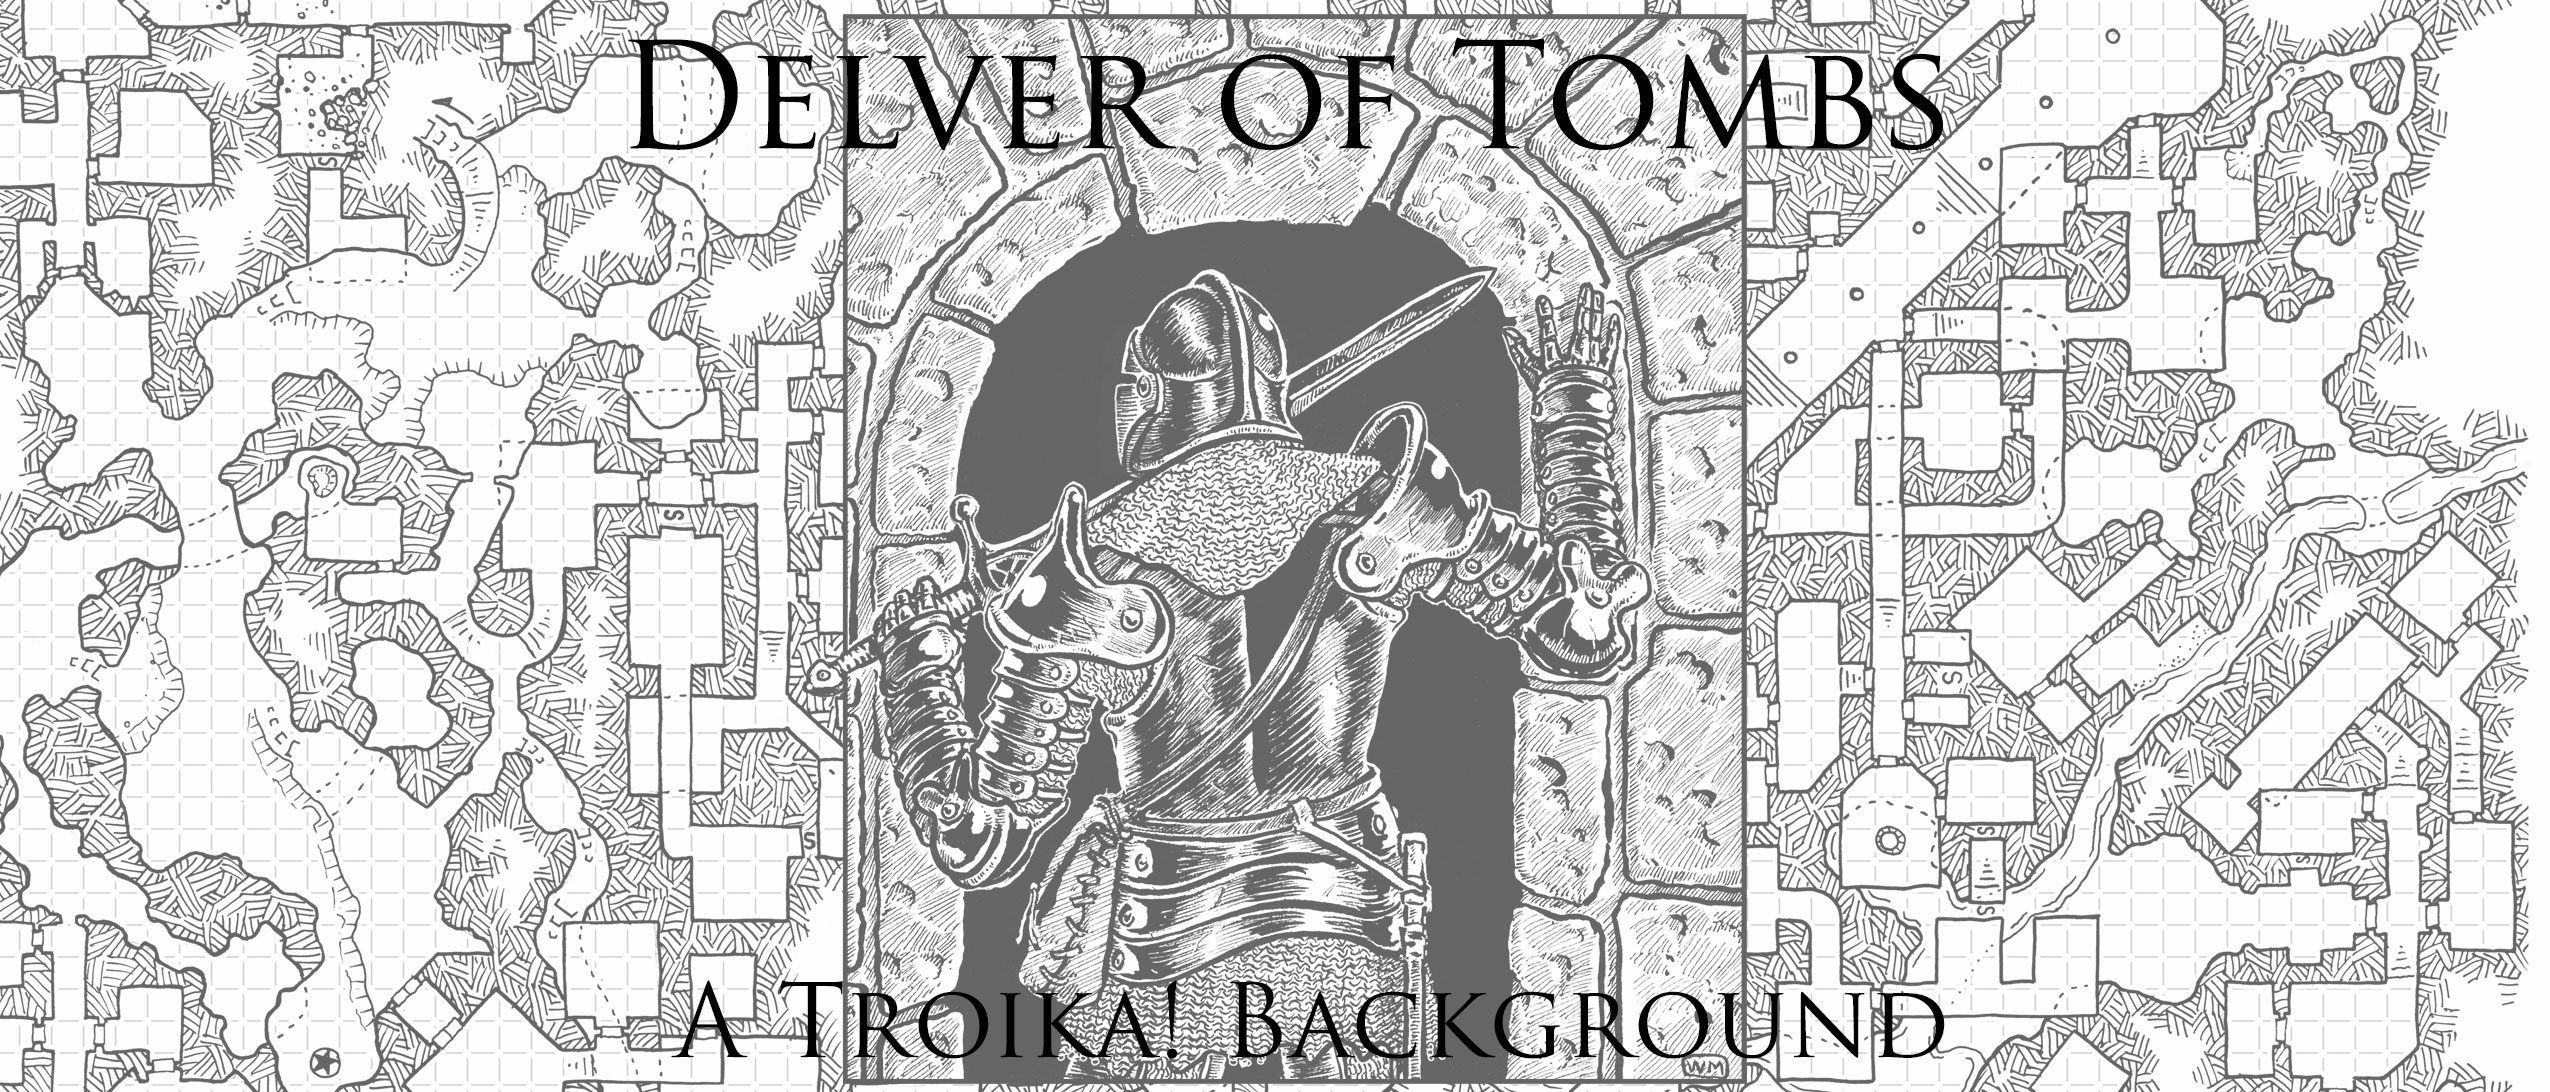 Delver of Tombs - A Troika! Background